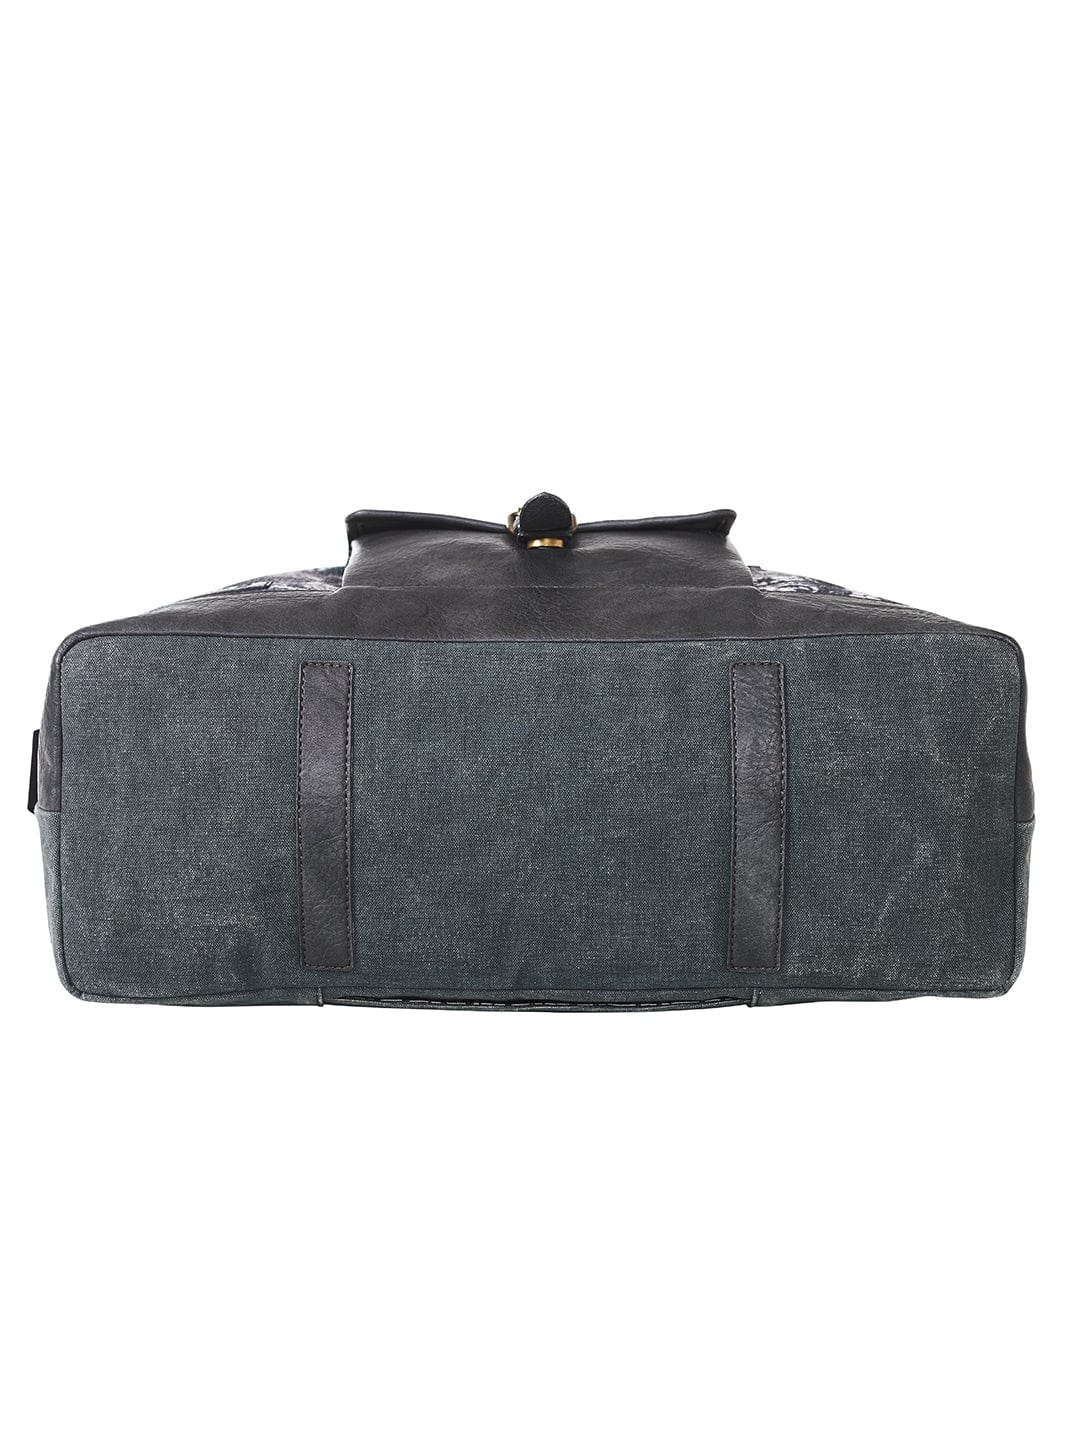 Mona-B Bag Mona B Canvas Large Duffel Gym Travel and Sports Bag with Stylish Design for Men and Women (Grey, Kilim) - (M-7011)